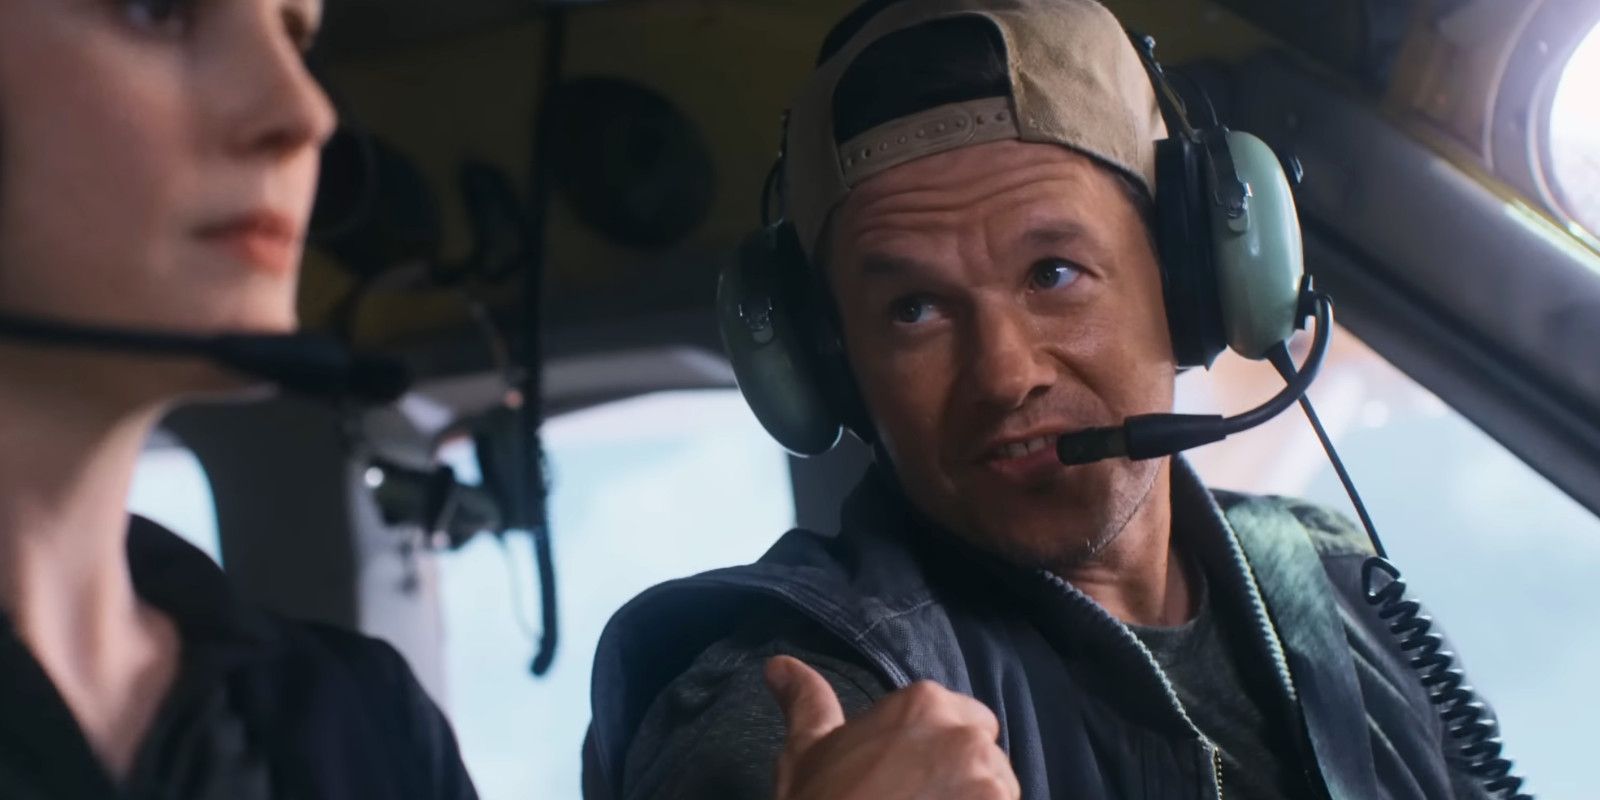 Mark Wahlberg giving a thumbs up and wearing a pilot headpiece in the cockpit of a plane in Flight Risk